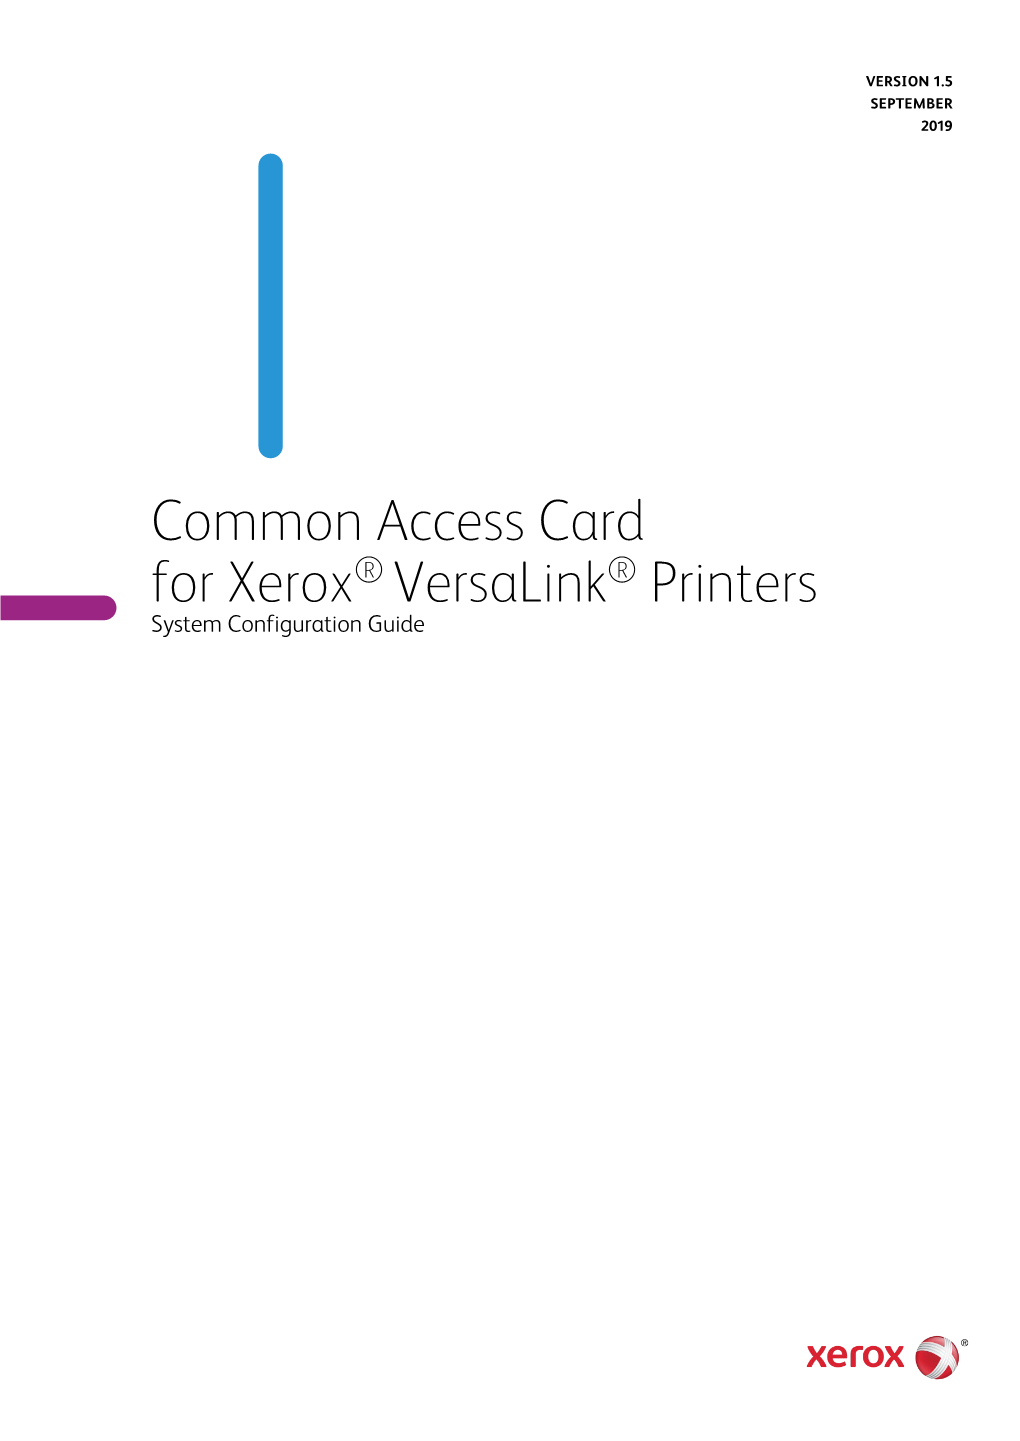 Common Access Card for Xerox® Versalink® Printers System Configuration Guide